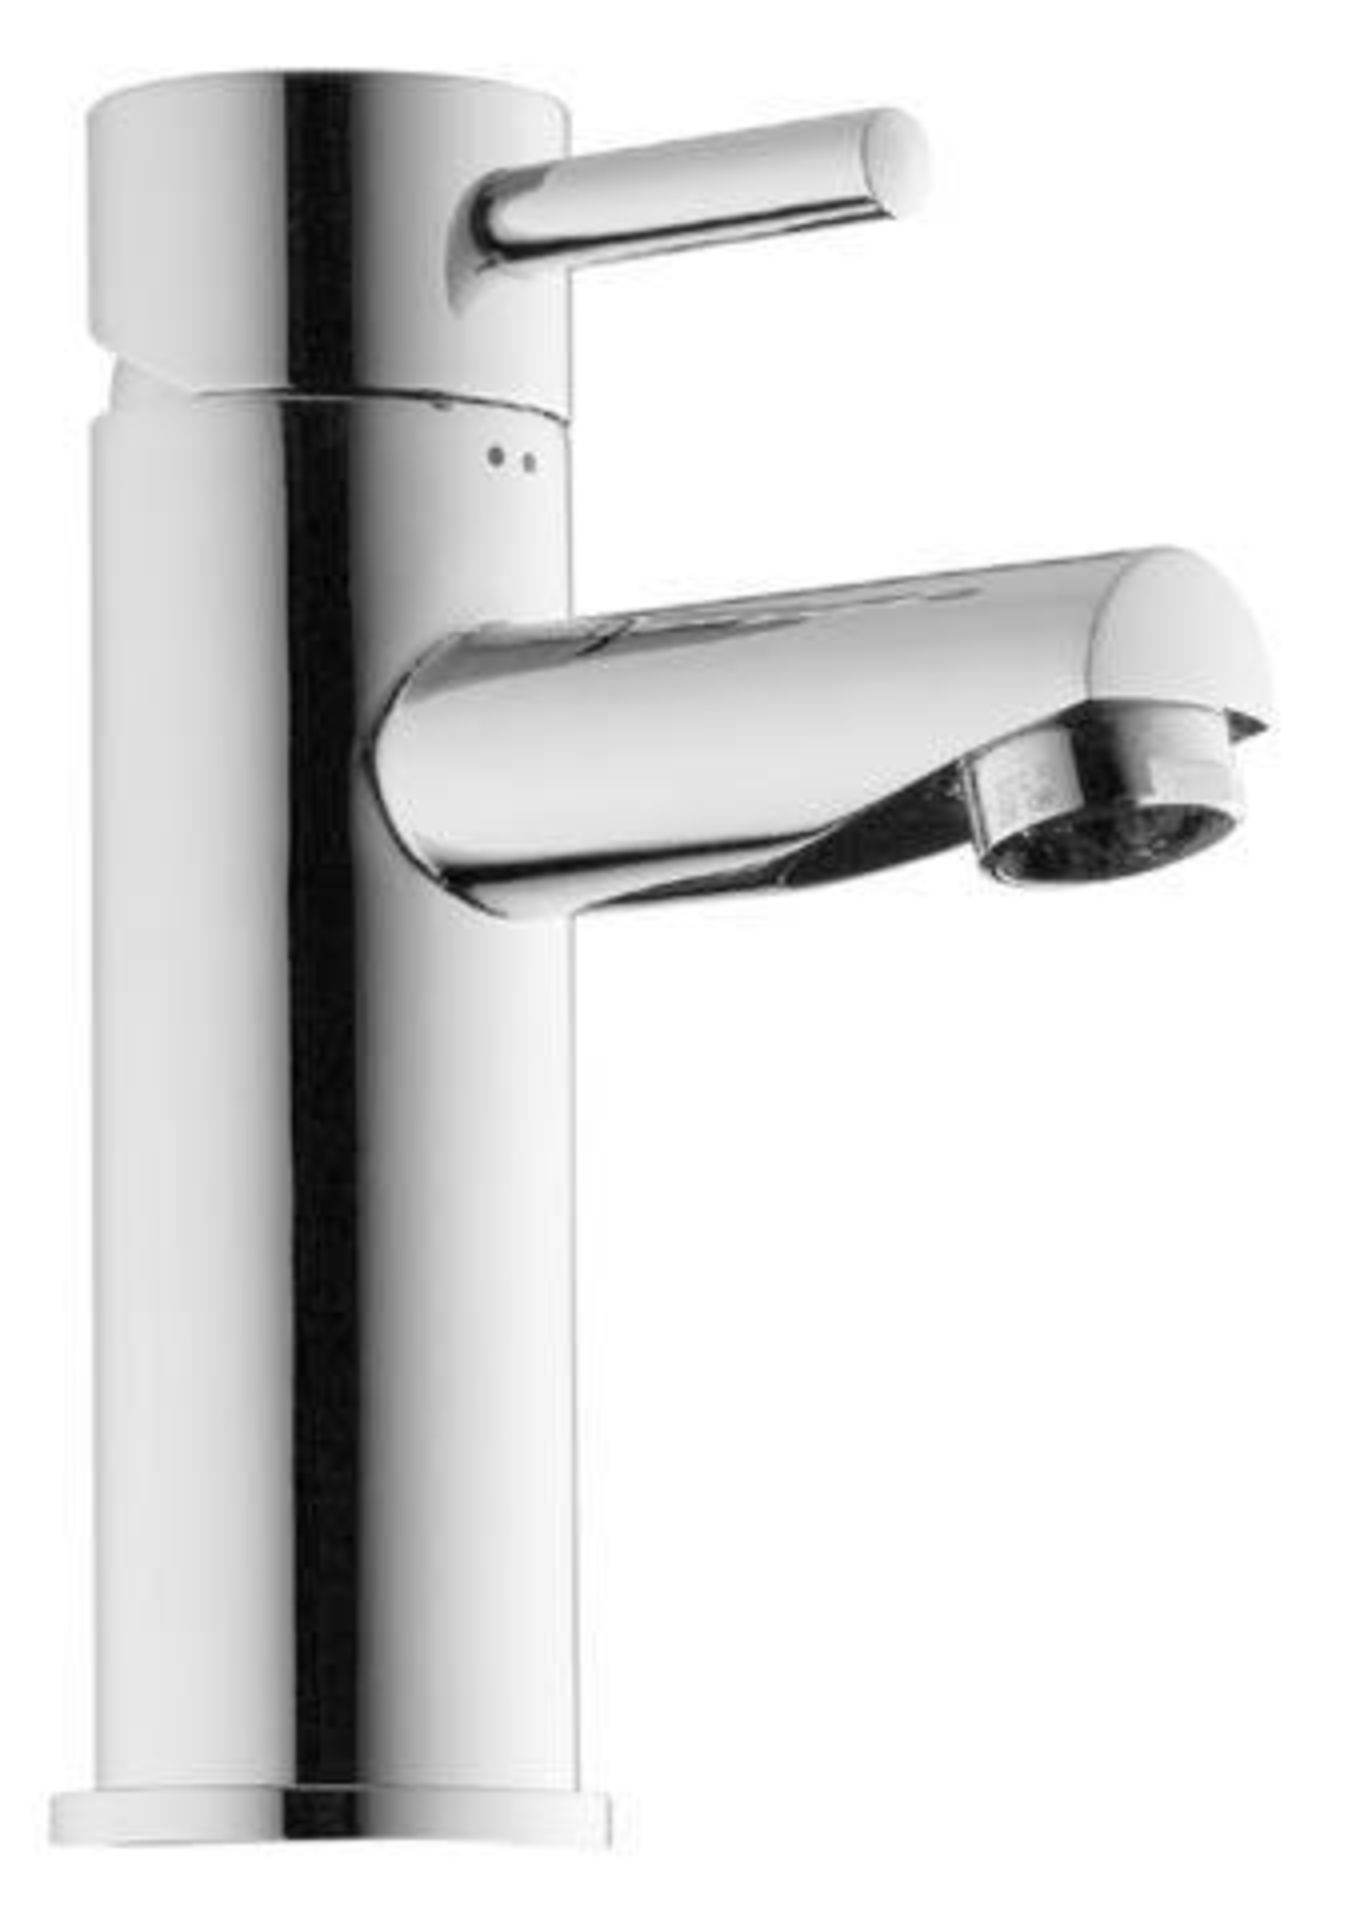 1 x Ideal Standard JADO "Geometry" A1 S/L Basin Mixer Tap, With Pop-up Waste (F1269AA) - Projection: